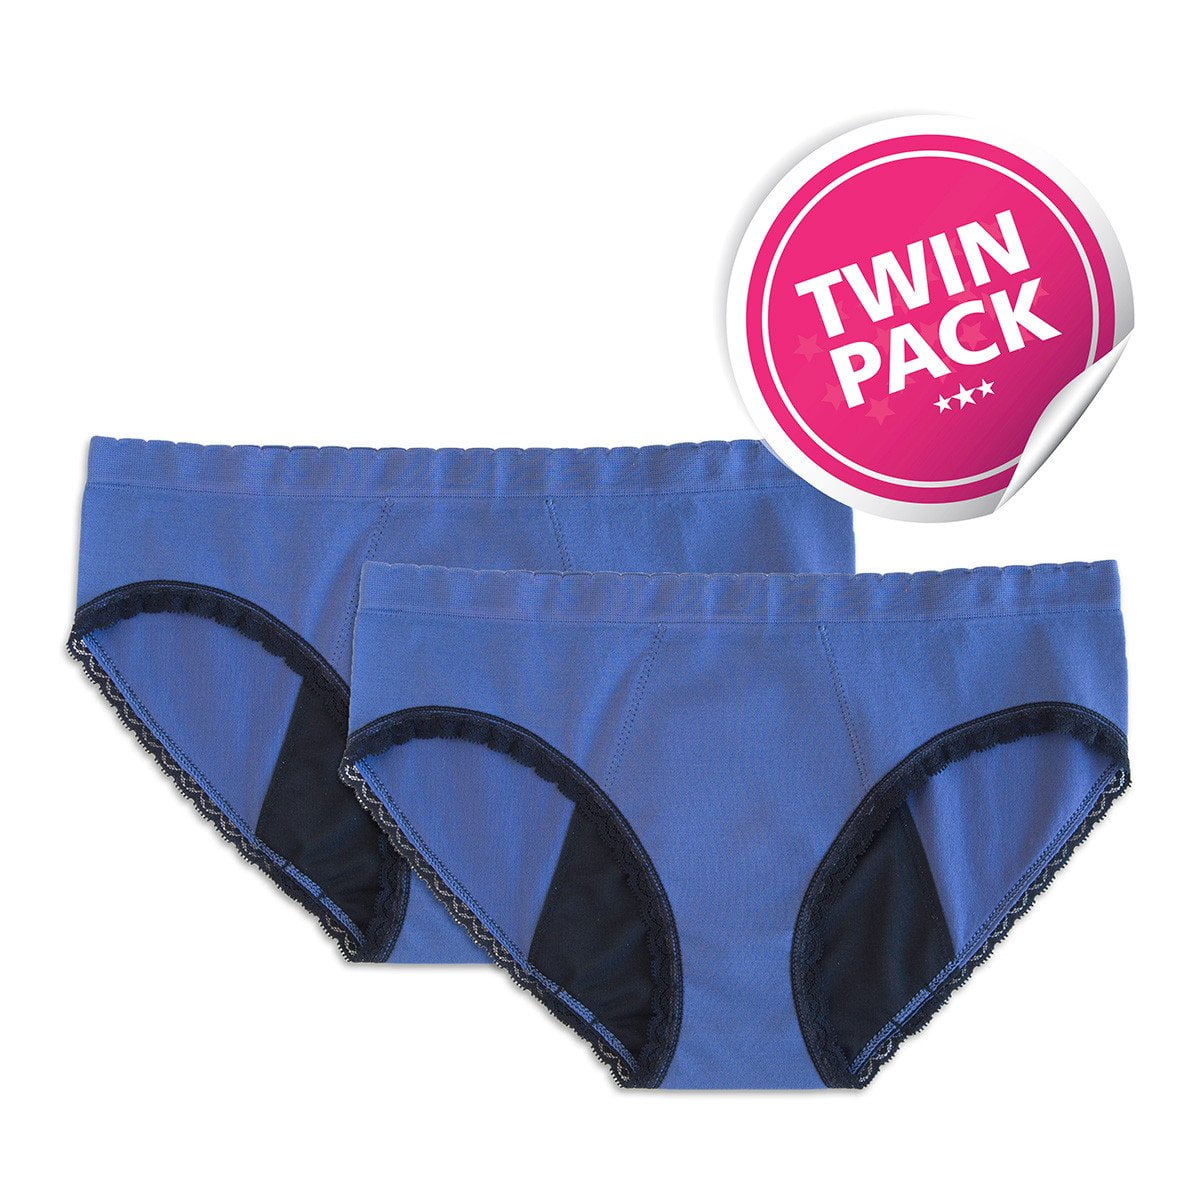 StainFree Reusable Period Panty - 2 Pack Blue Hipster (XS